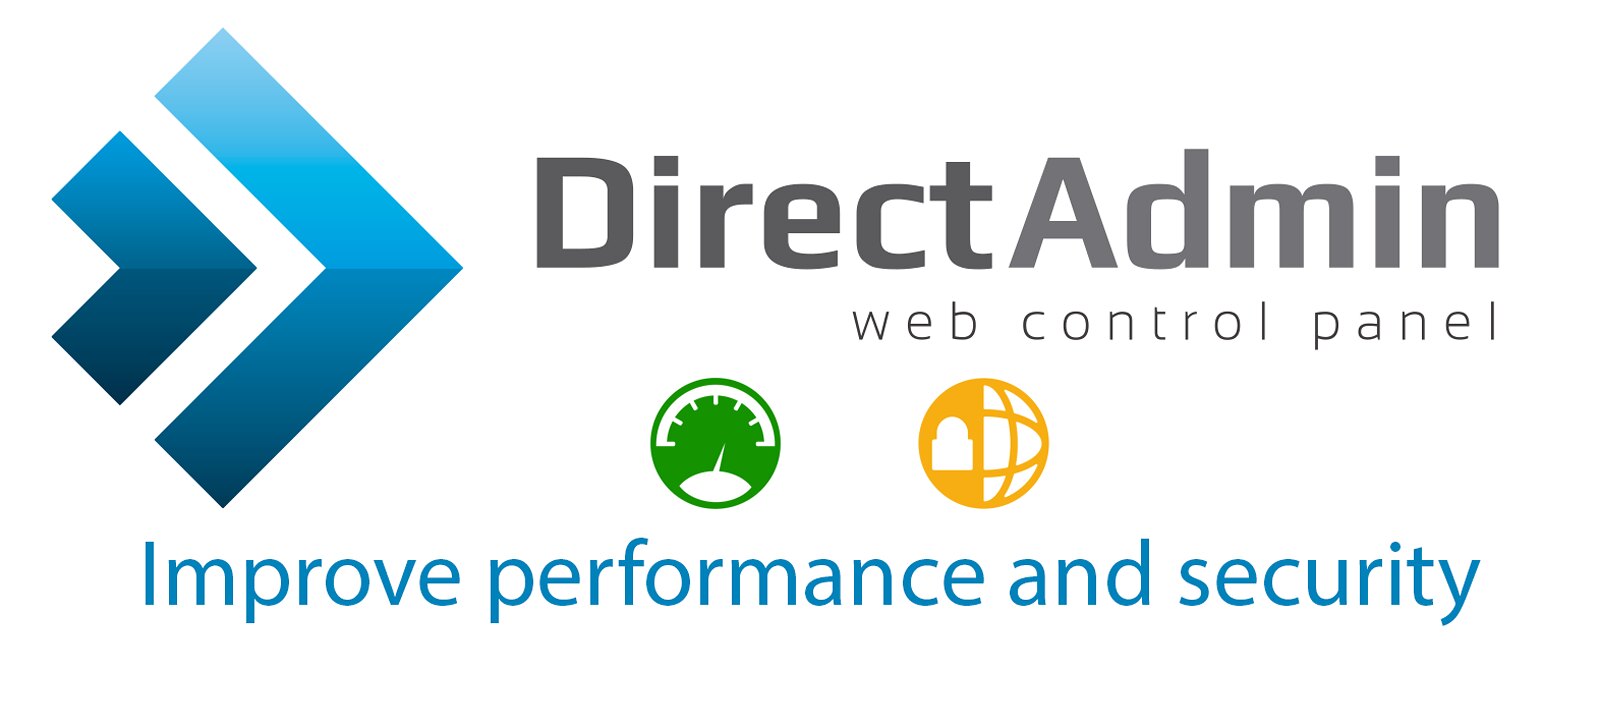 DirectAdmin: Improve performance and security